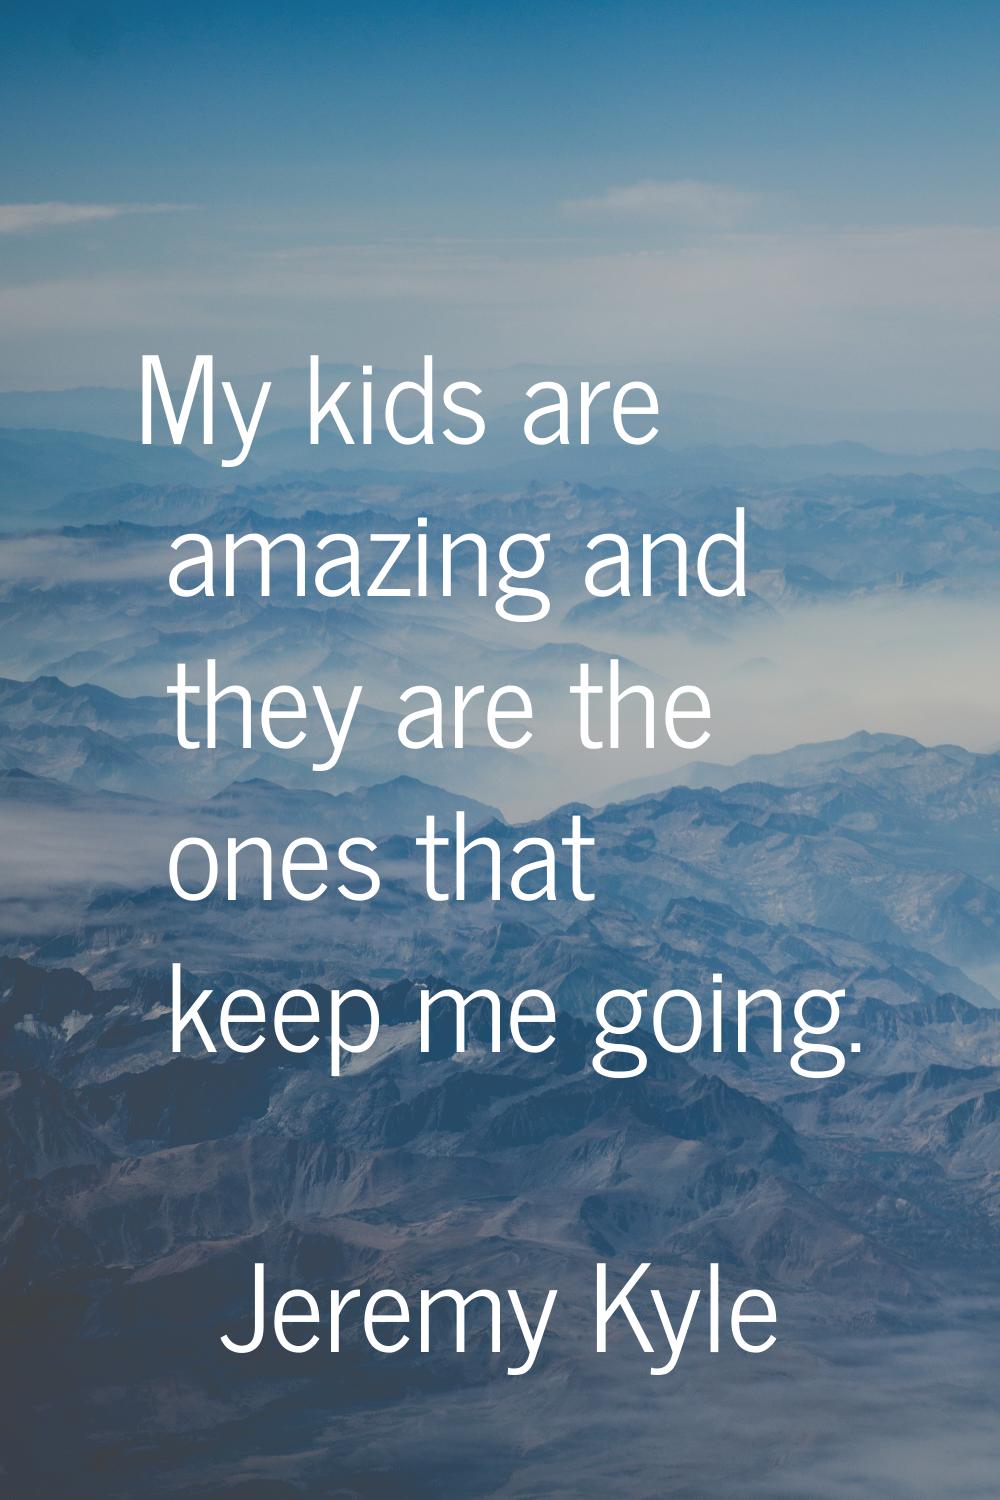 My kids are amazing and they are the ones that keep me going.